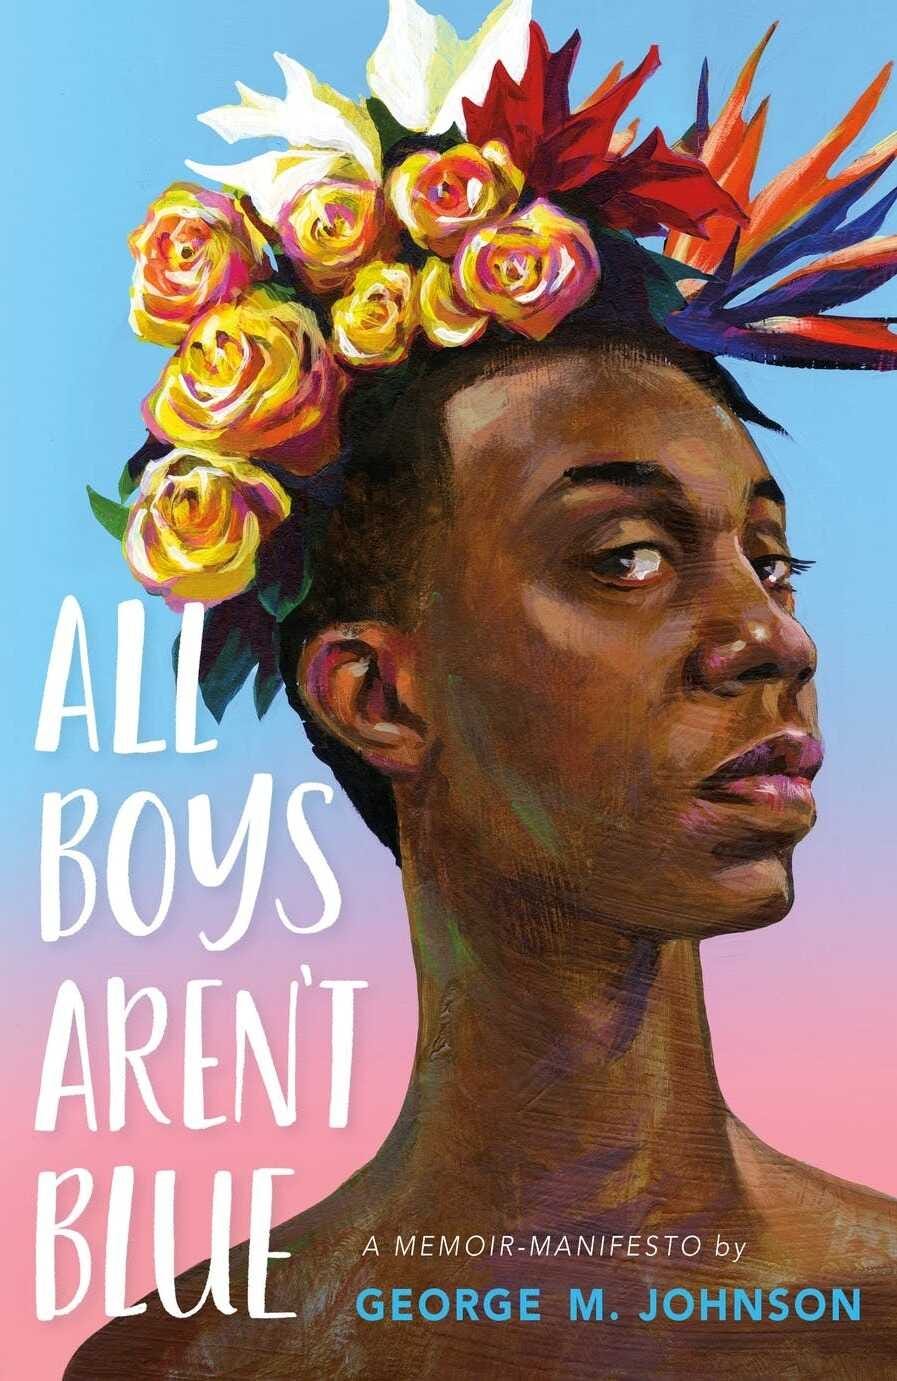 The cover of George M. Johnson's All Boys Aren't Blue